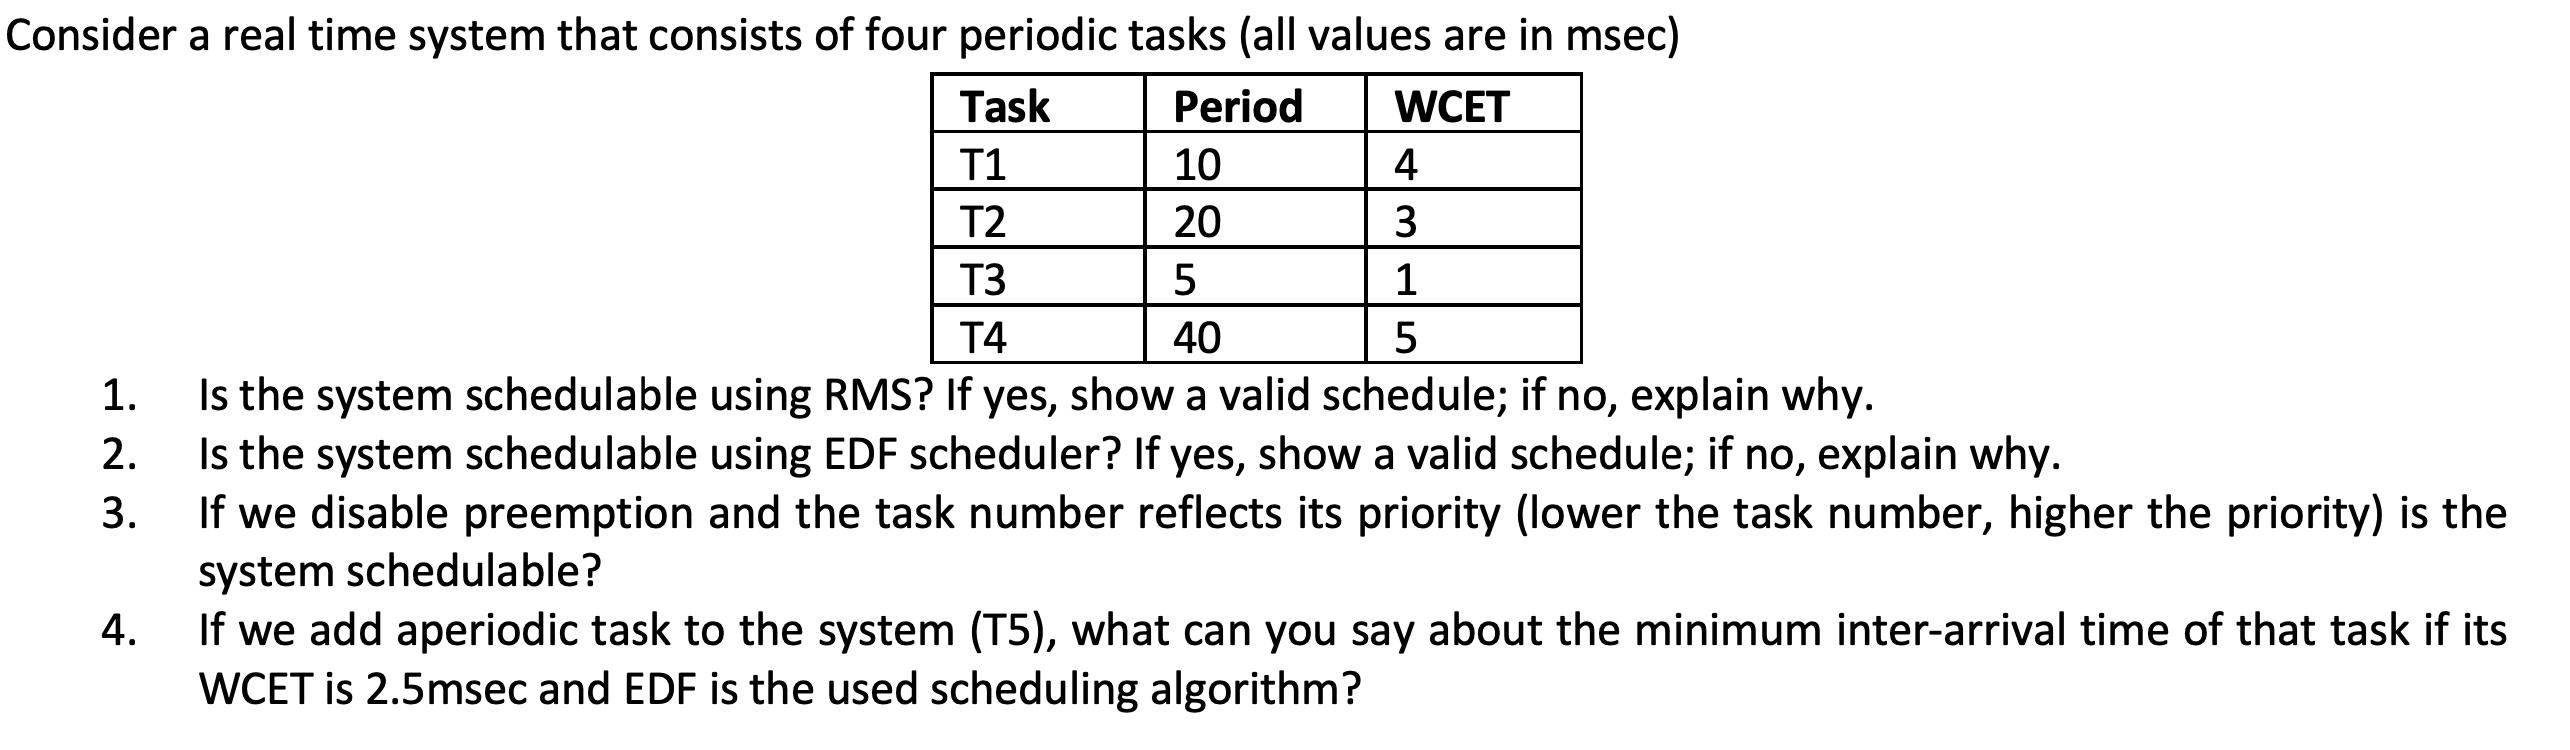 Consider a real time system that consists of four periodic tasks (all values are in msec) Task Period WCET T1